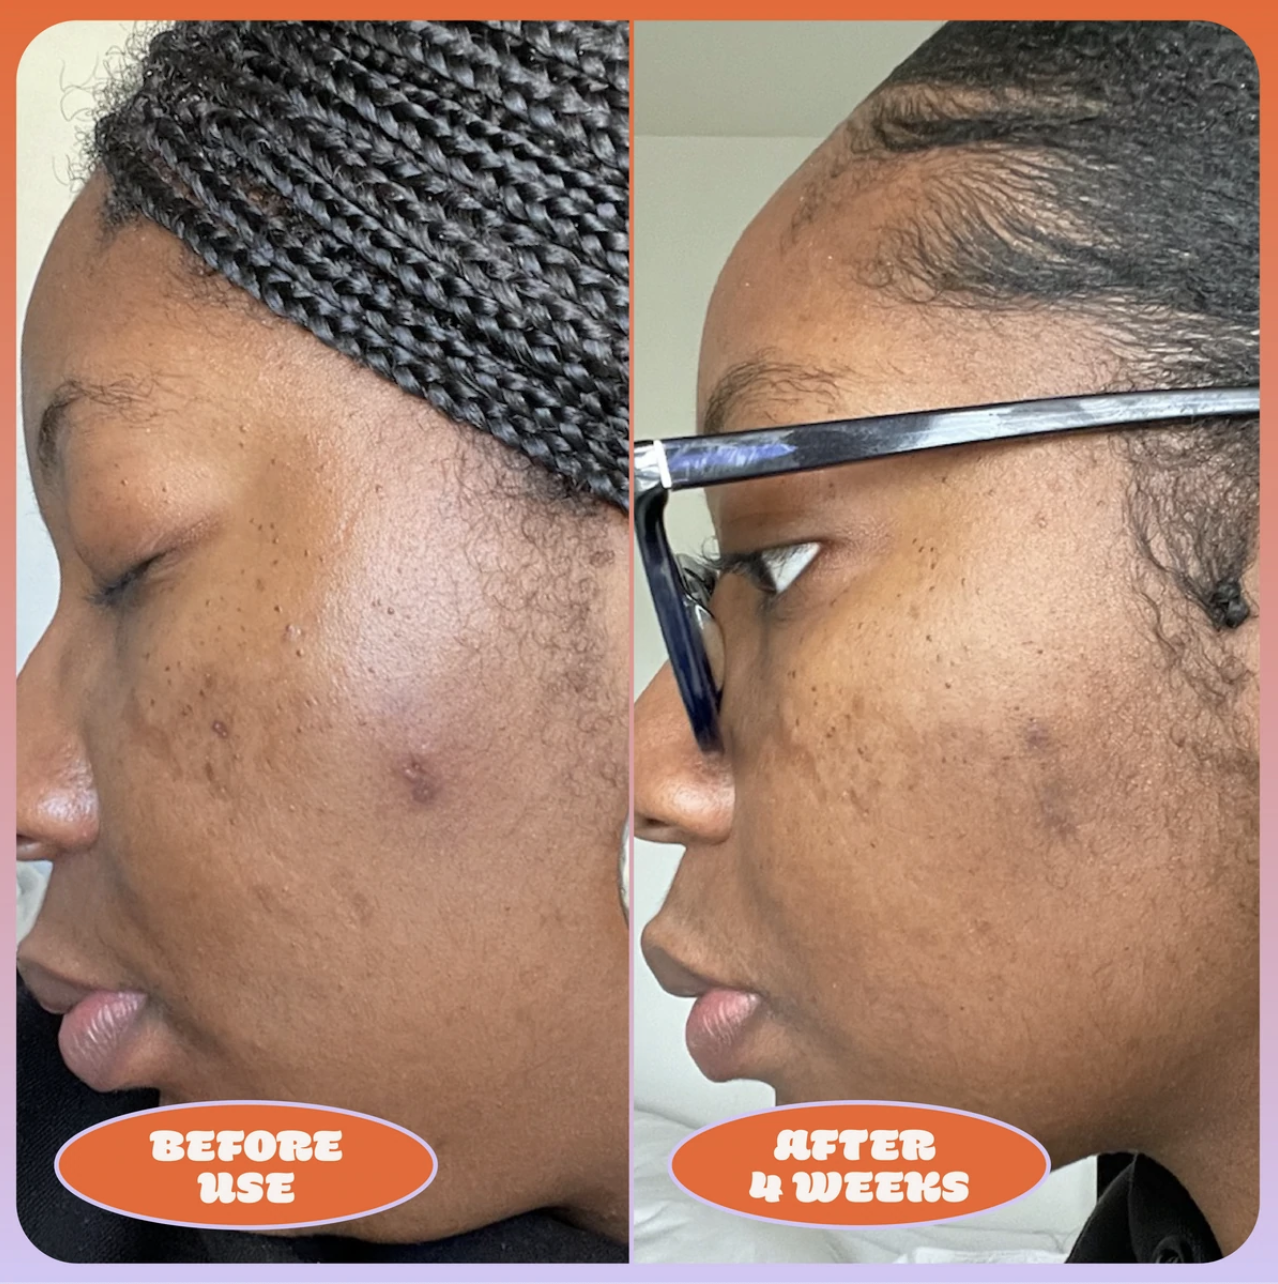 a before and after photo of a darker skintone that looks smoother after four weeks of using the serum